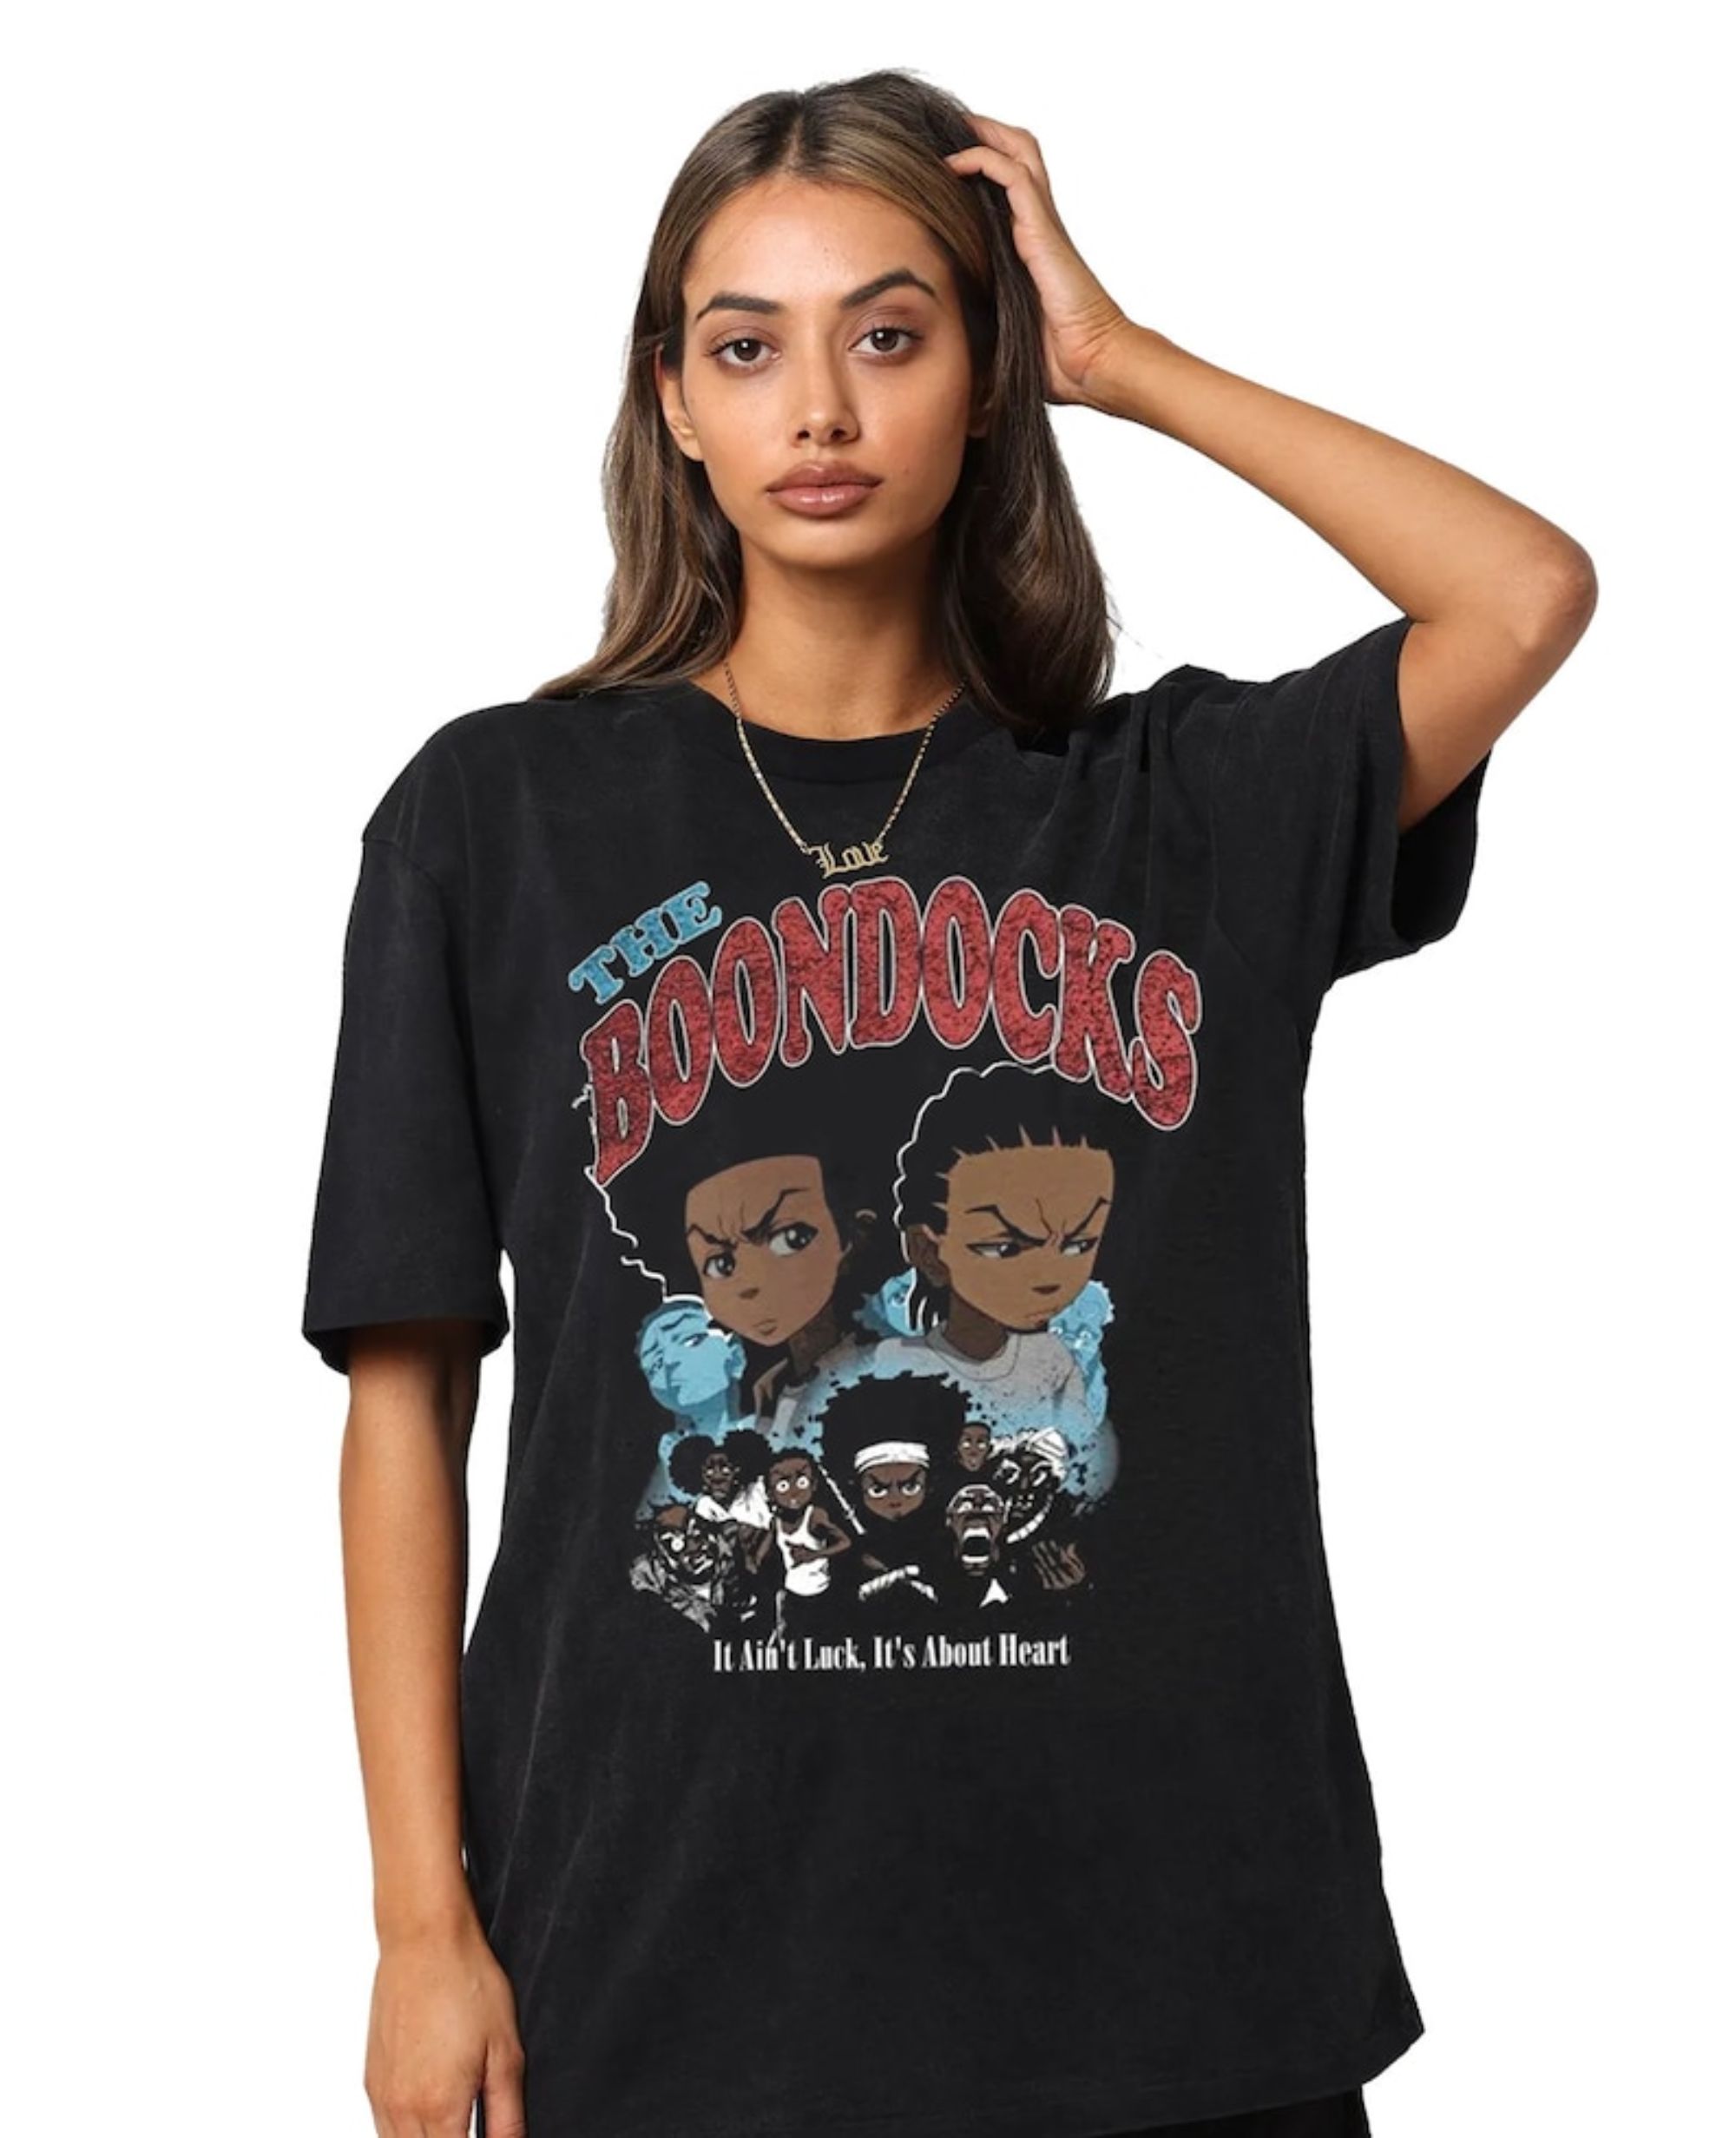 Boondocks Supreme T Shirt For Men Women And Youth